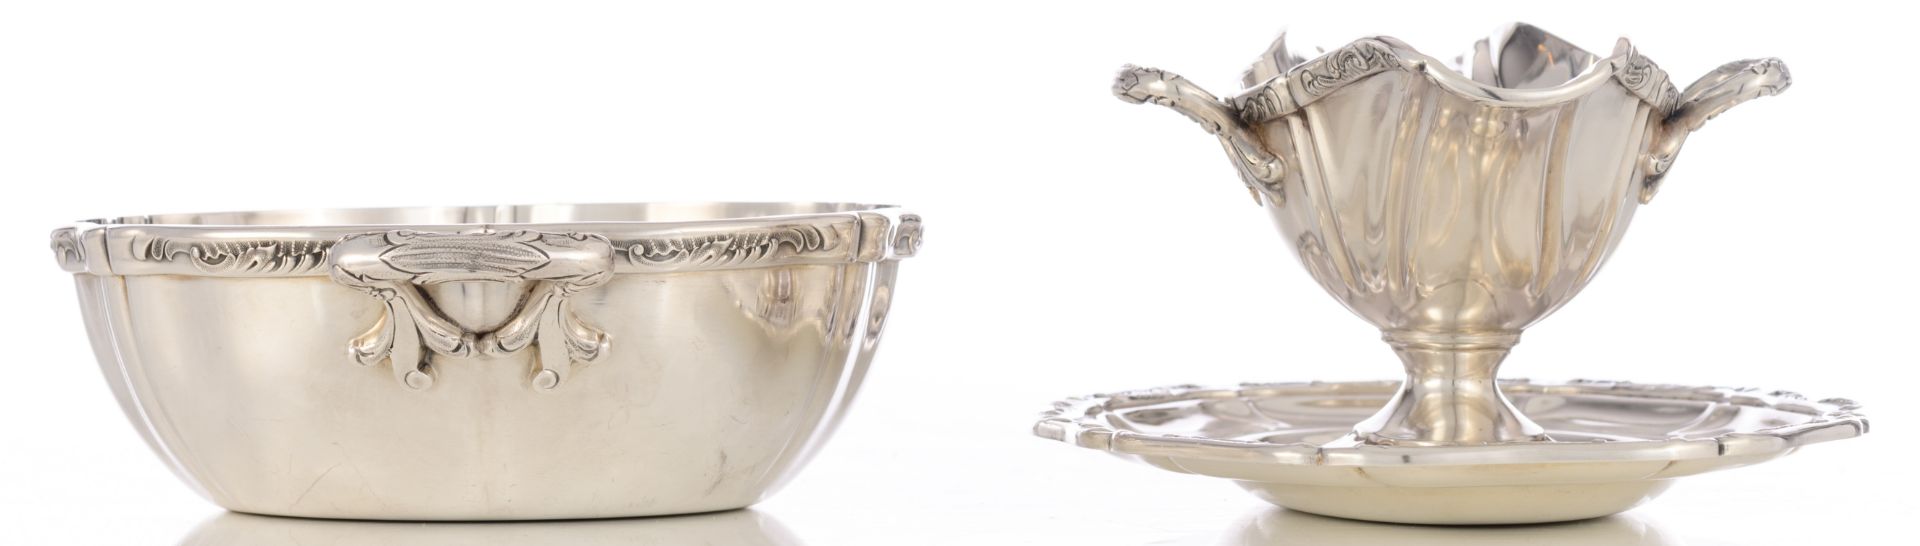 A Neoclassical Sheffield silver-plated tureen, maker's mark William Hutton & Son, 19th / 20thC, W 36 - Image 44 of 56